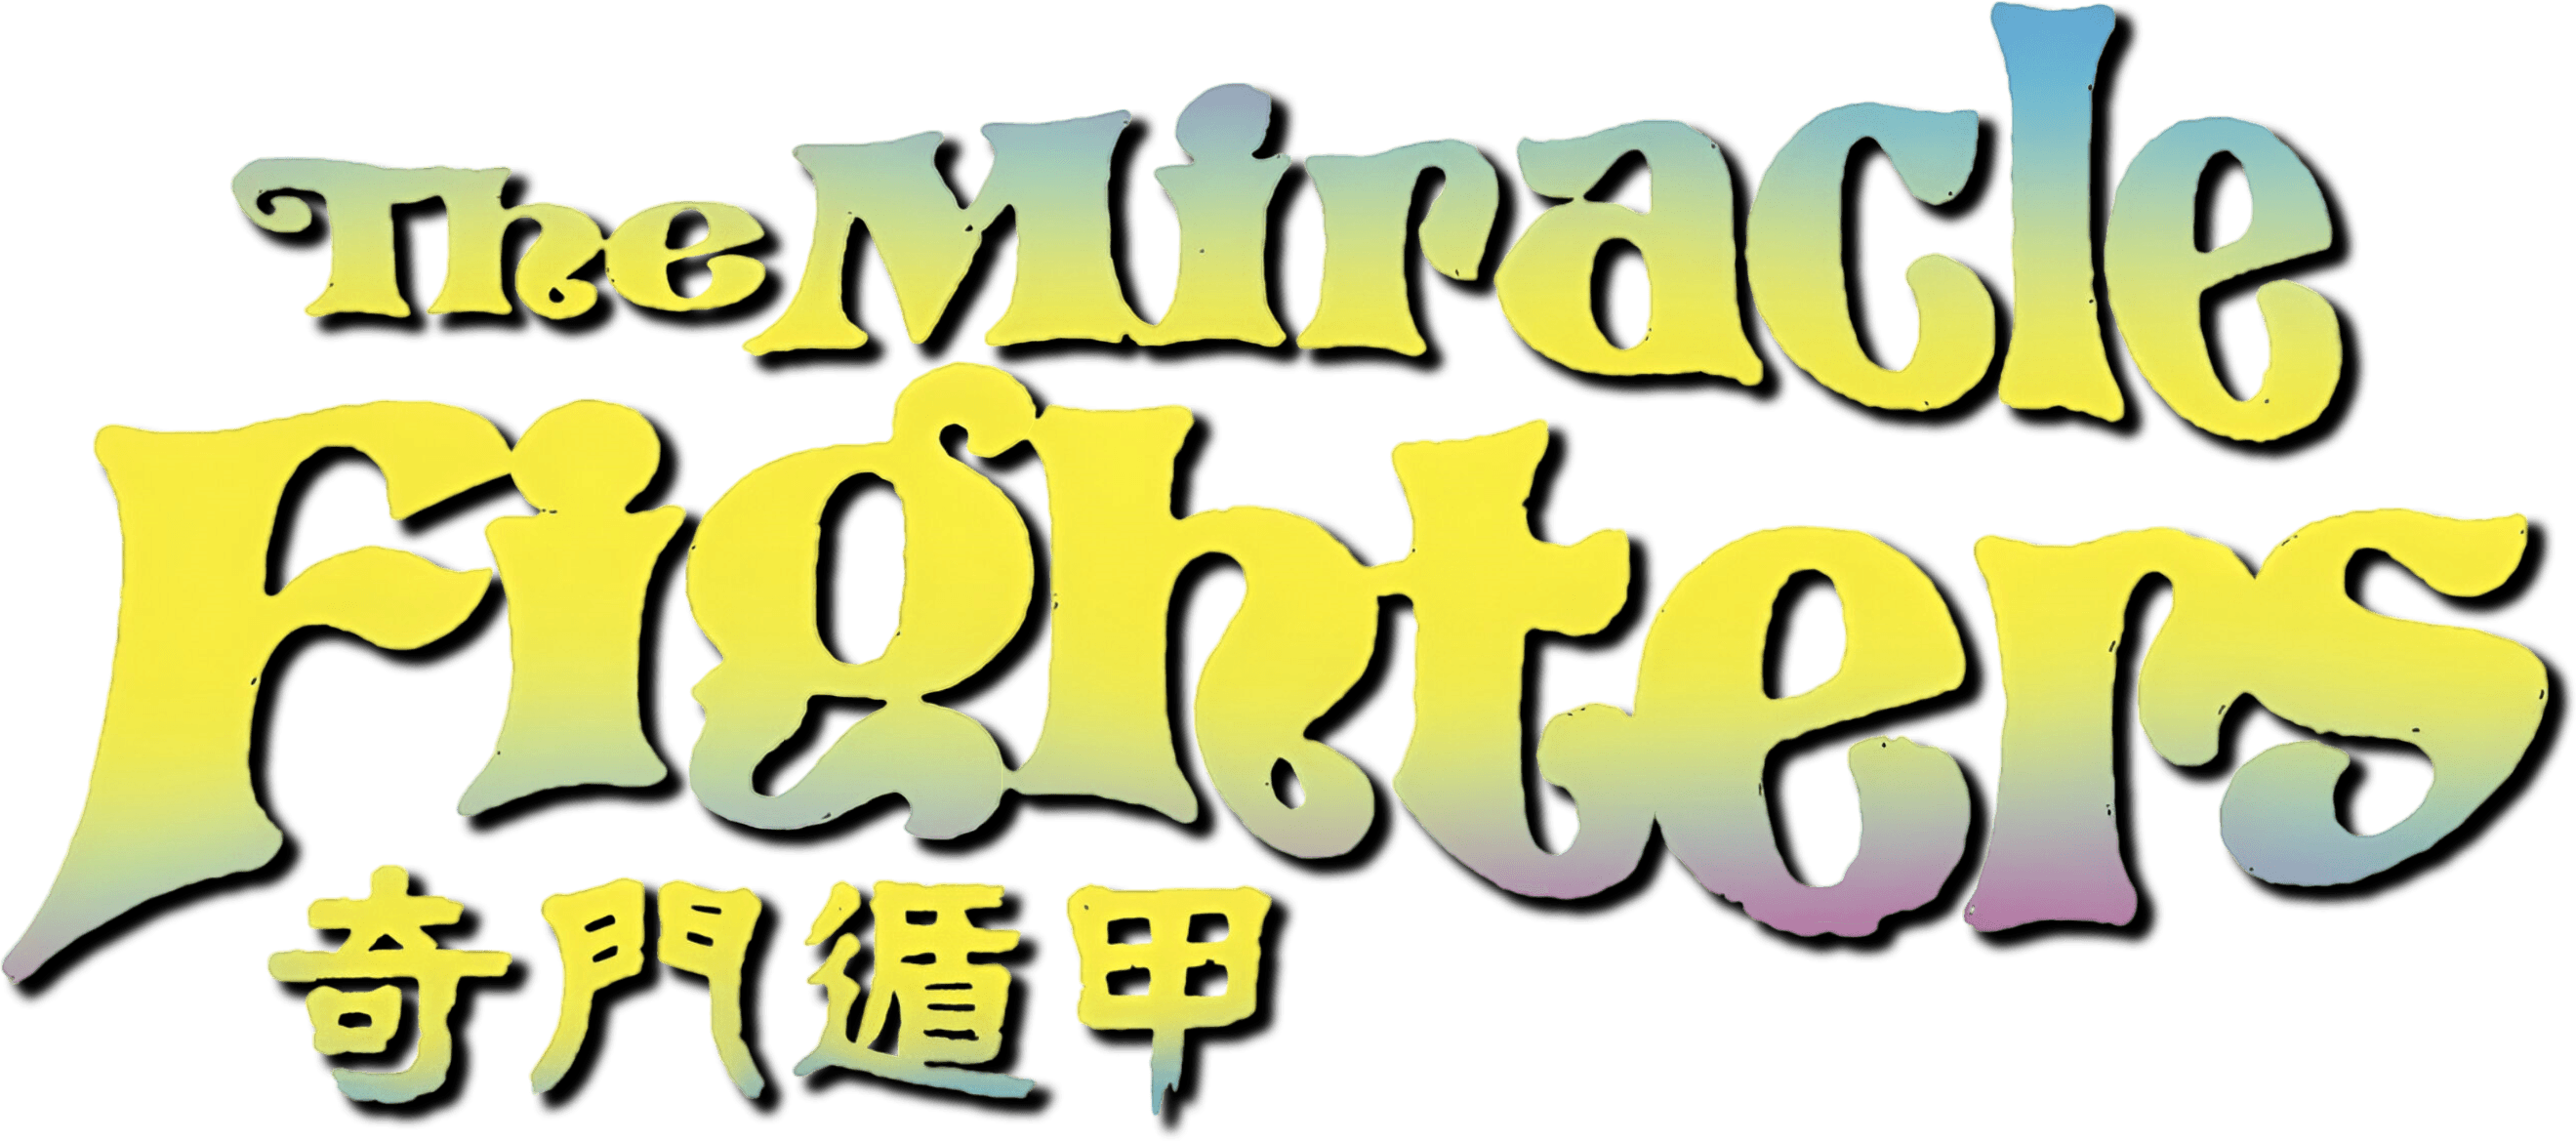 The Miracle Fighters logo